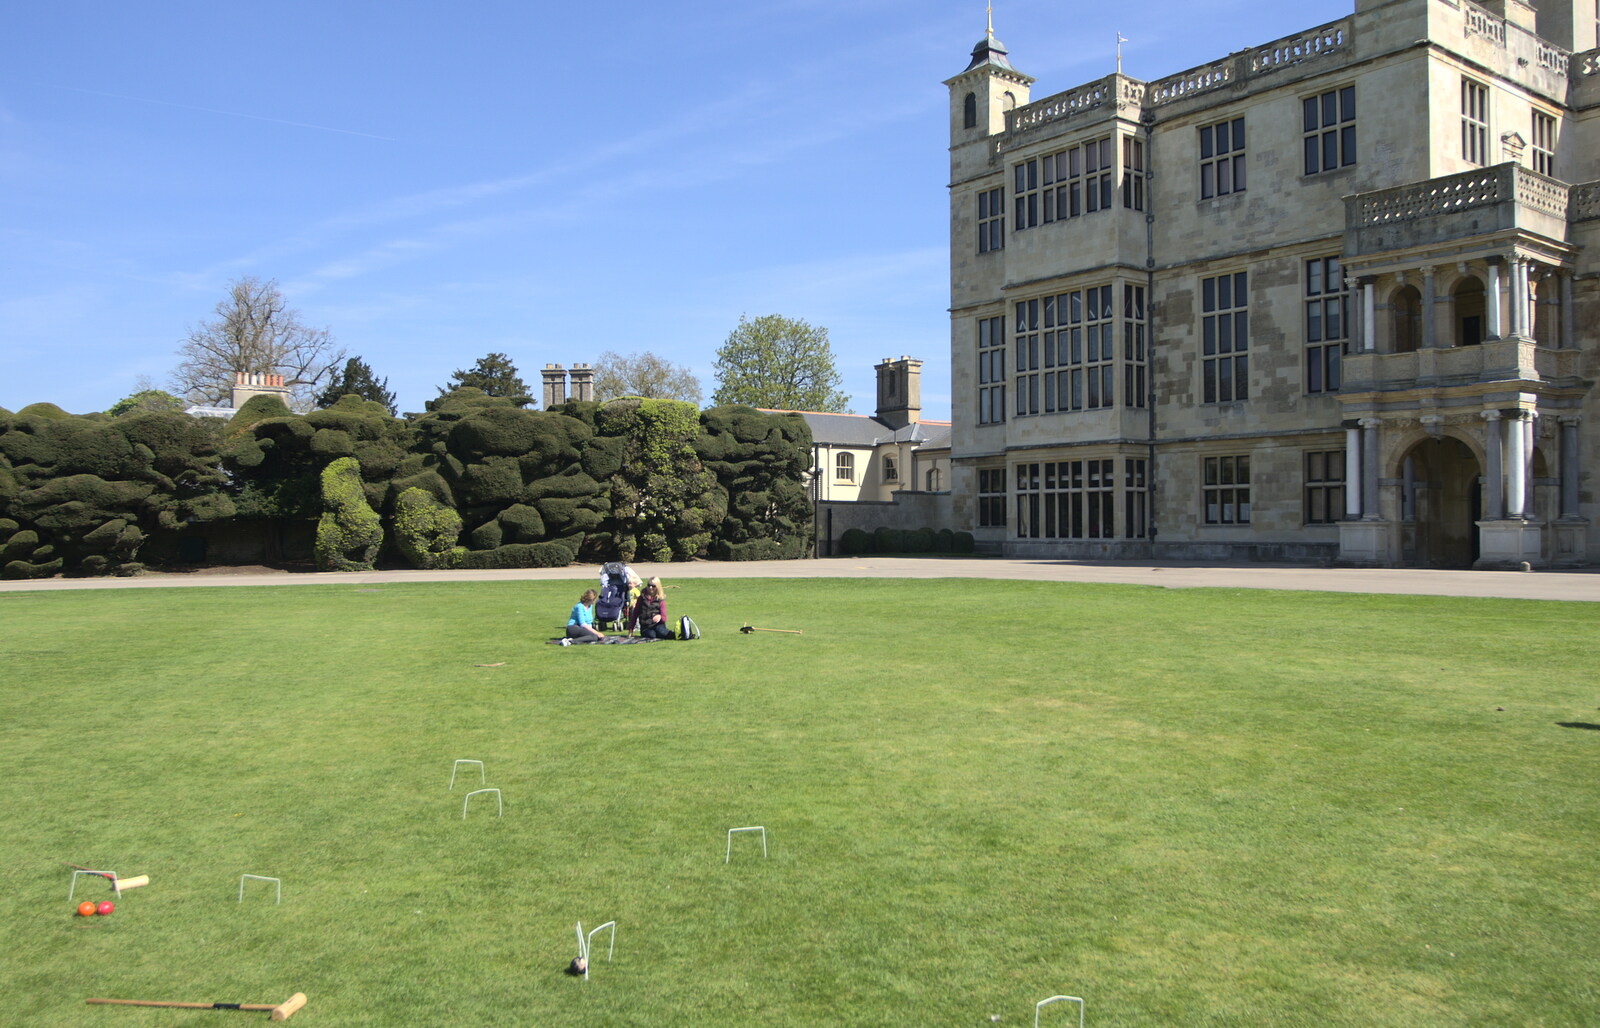 Croquet on the lawn from A Trip to Audley End House, Saffron Walden, Essex - 16th April 2014